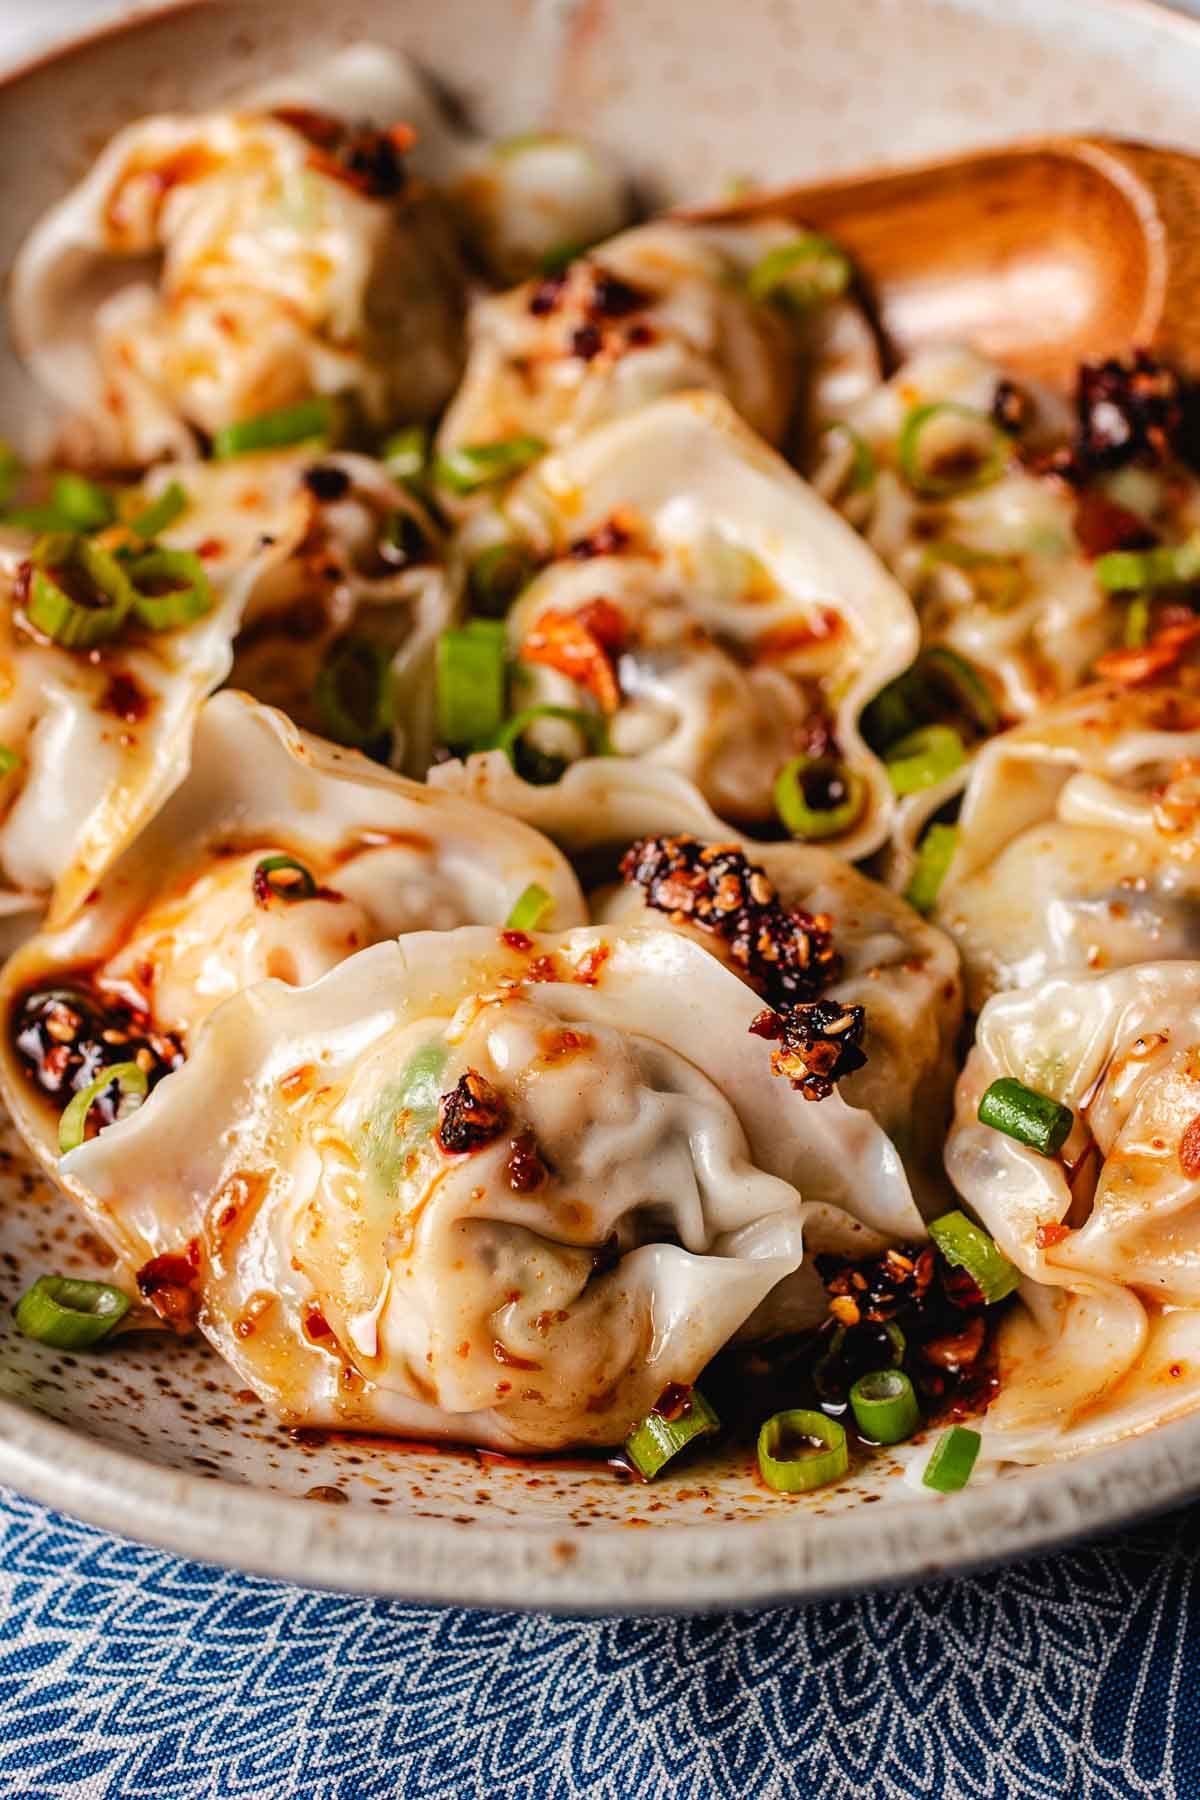 A side close shot image shows cooked wontons with sauce drizzled on top.